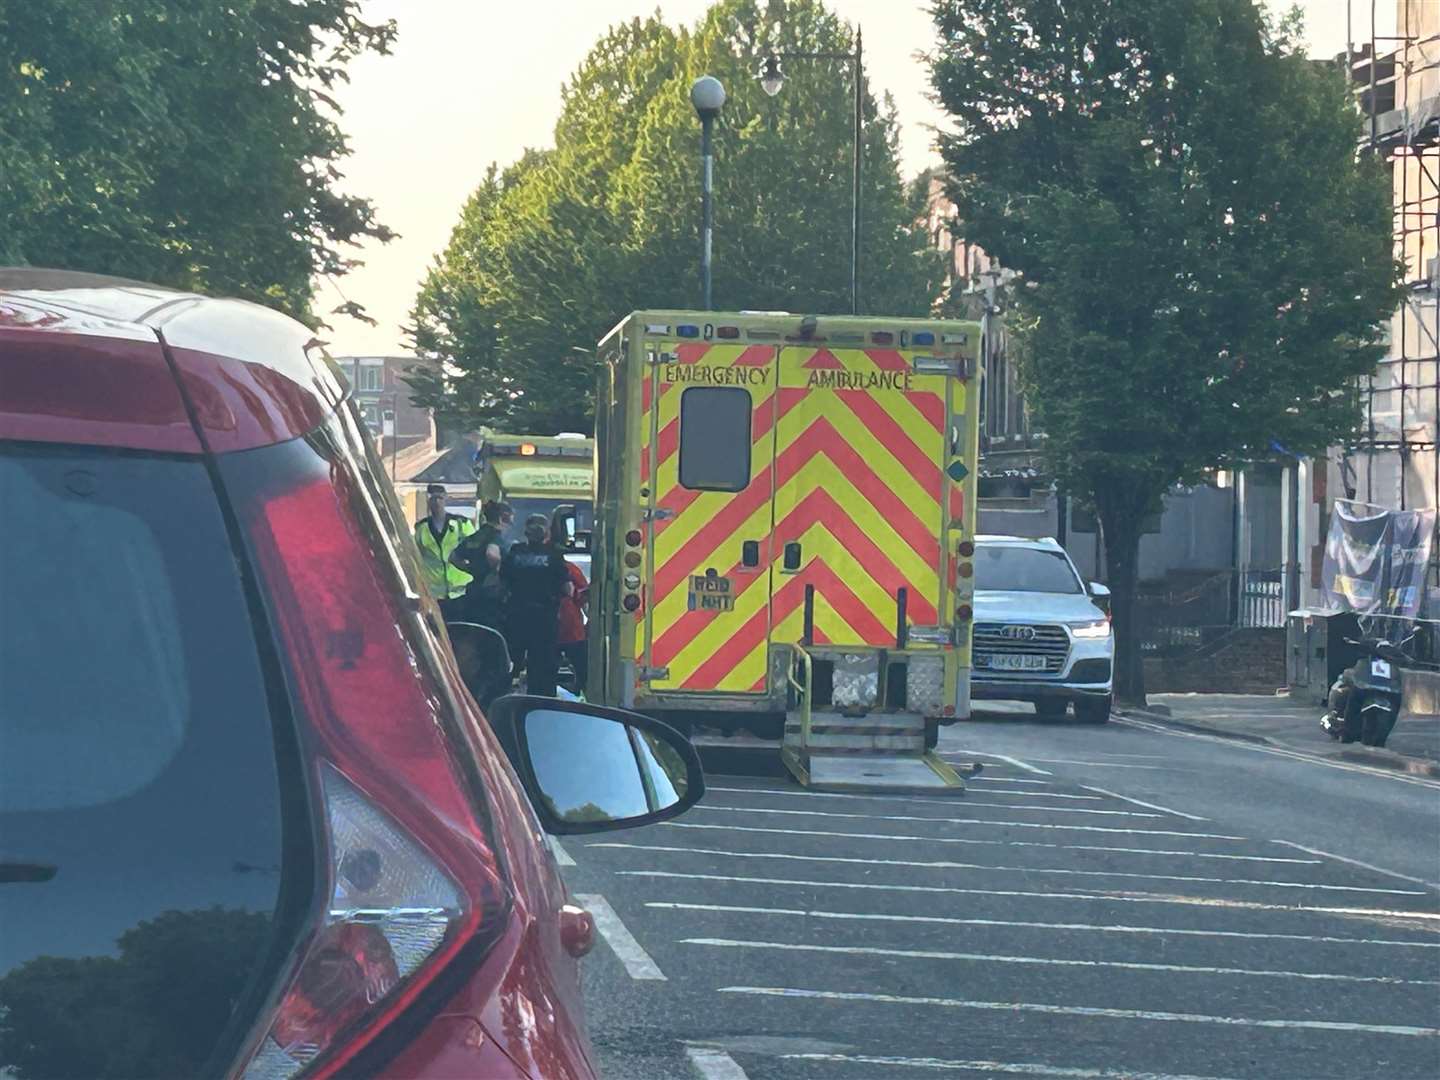 Emergency services were called to New Road, Chatham this evening